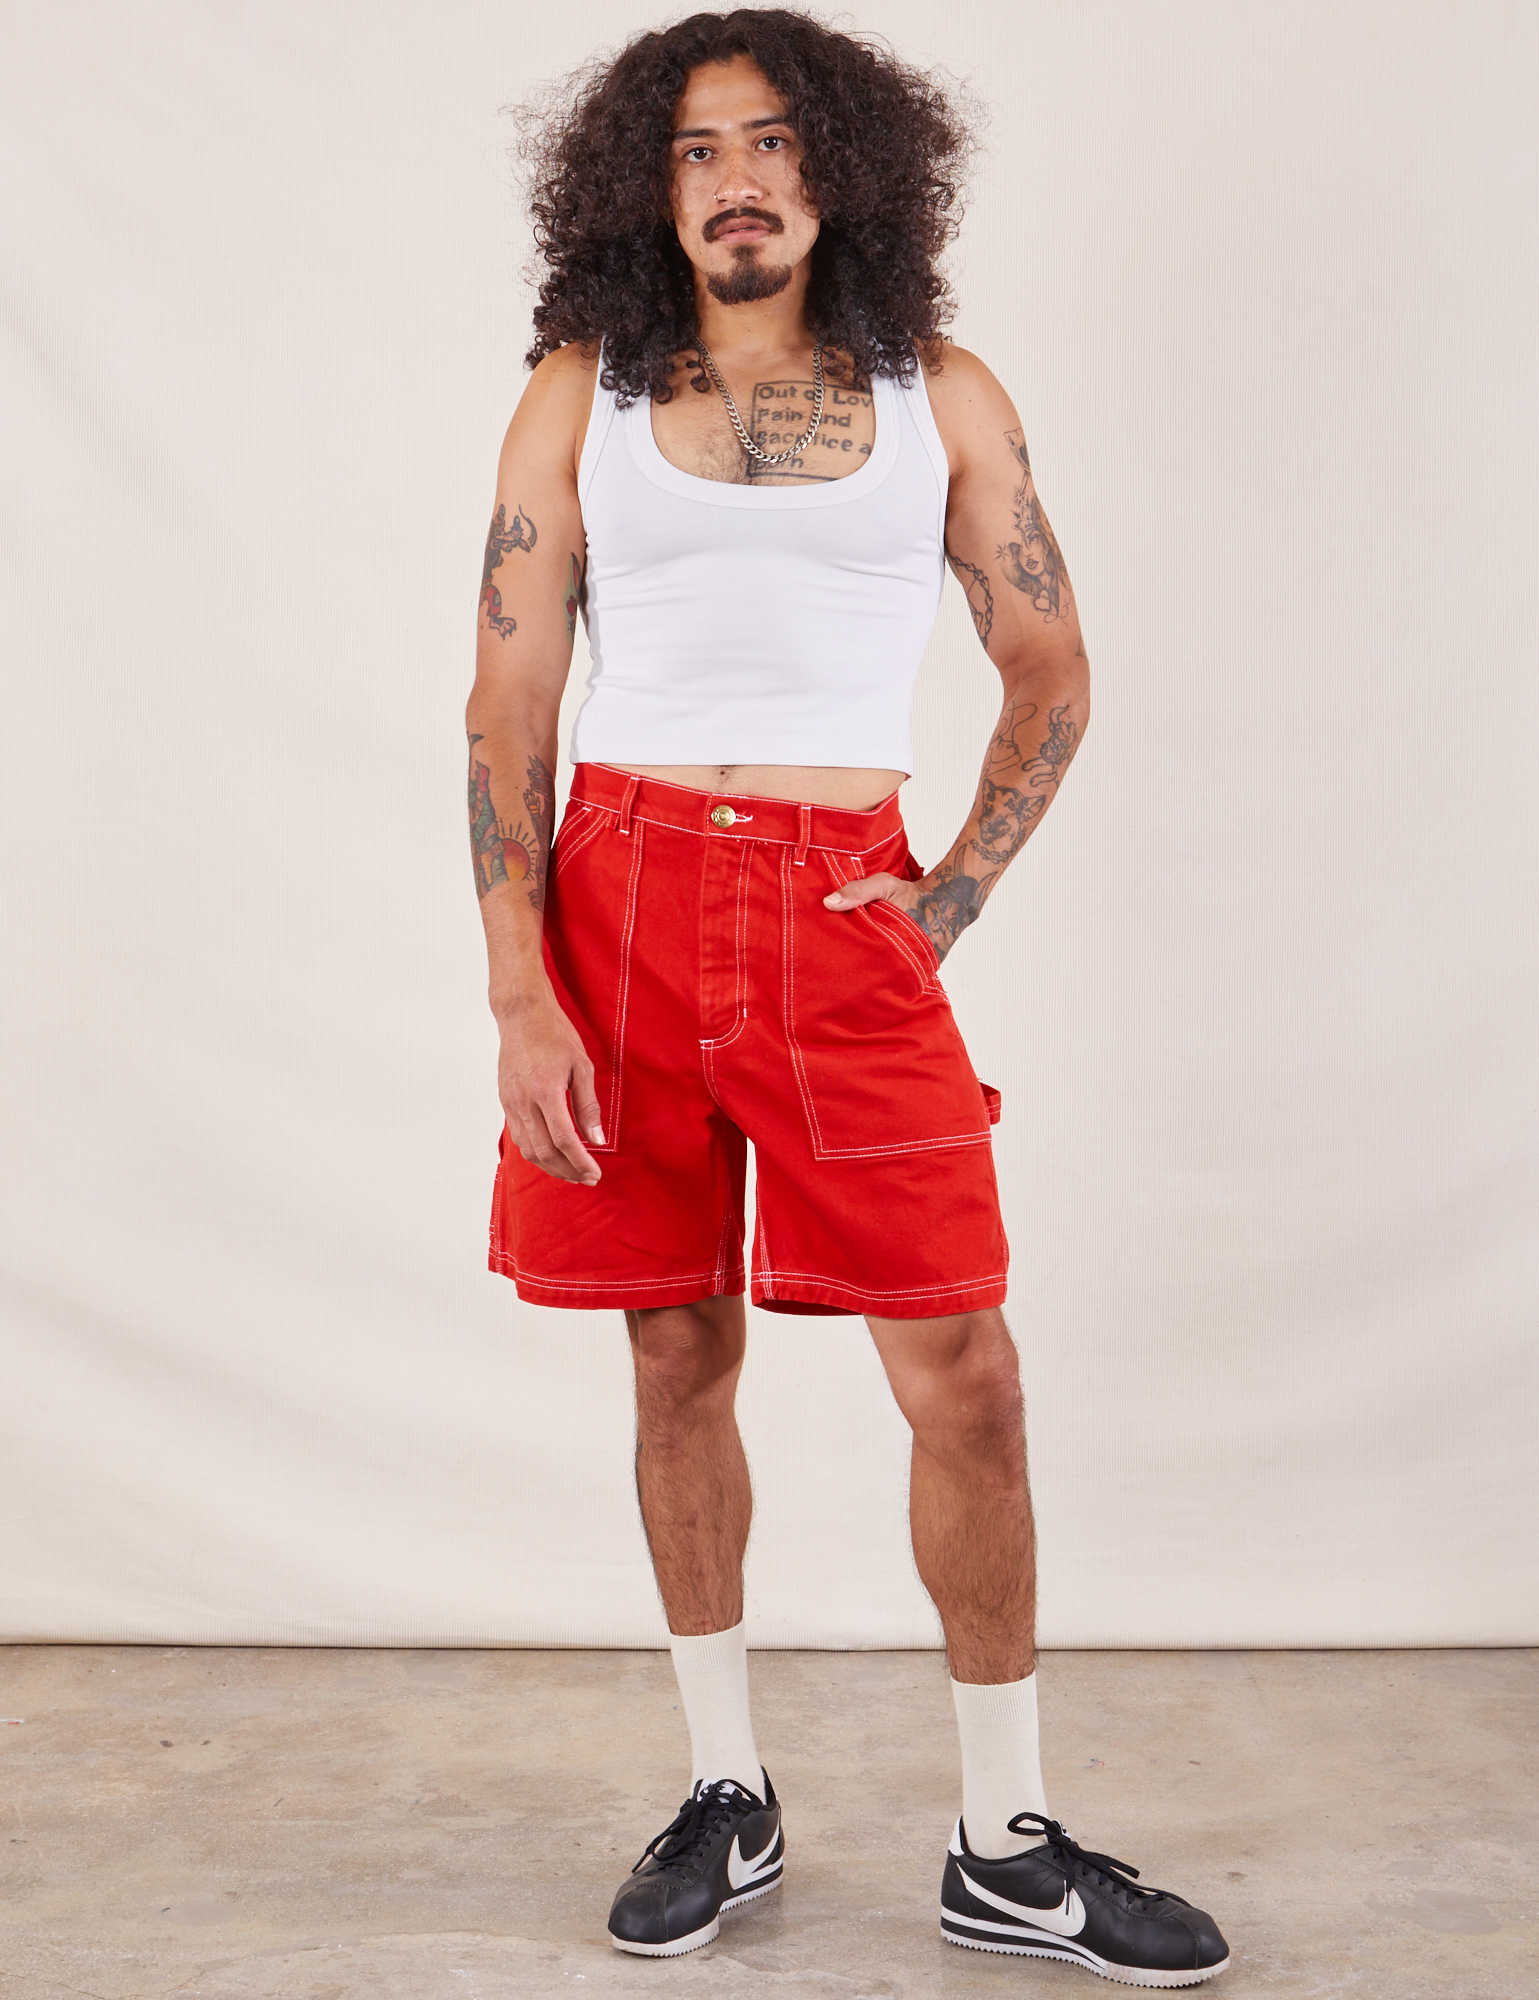 Jesse is 5'8" and wearing S Carpenter Shorts in Mustang Red paired with a Cropped Tank in vintage tee off-white